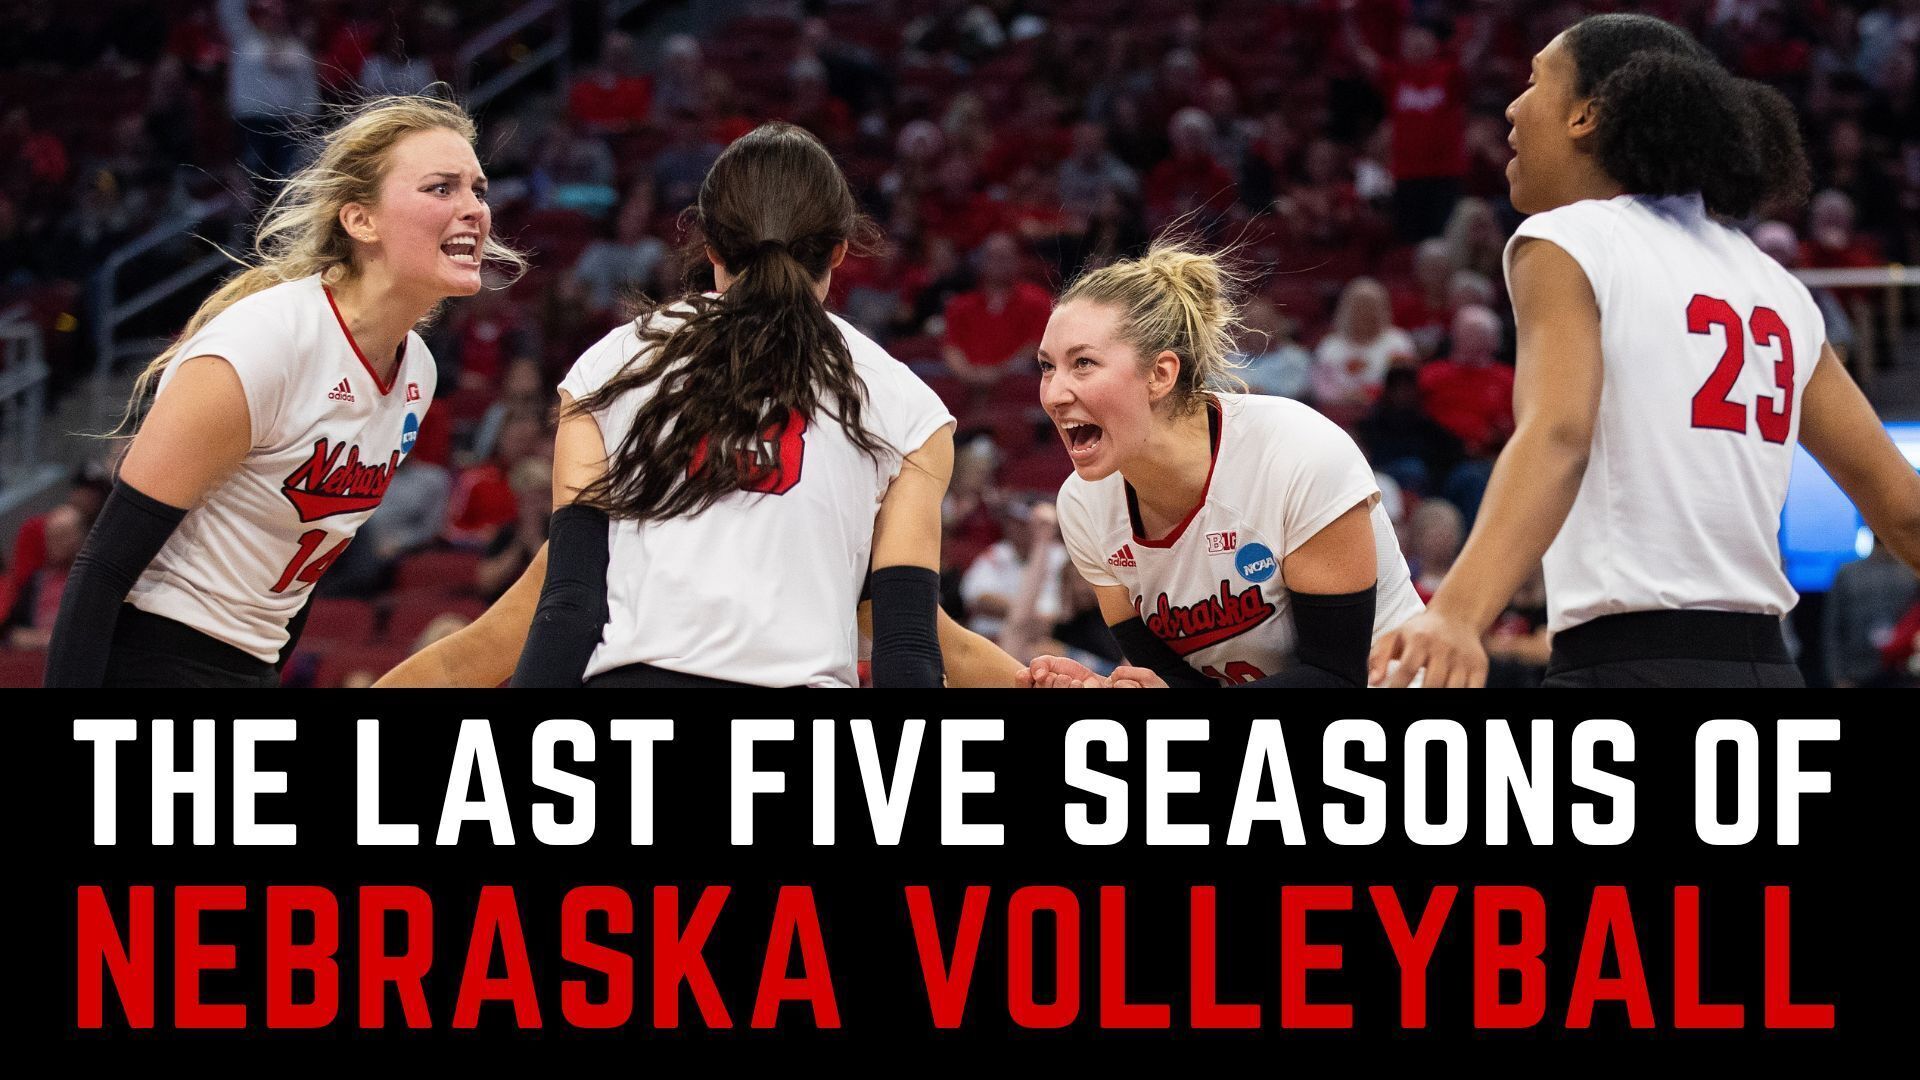 Nebraska volleyball to play match at Memorial Stadium in historic statewide celebration event